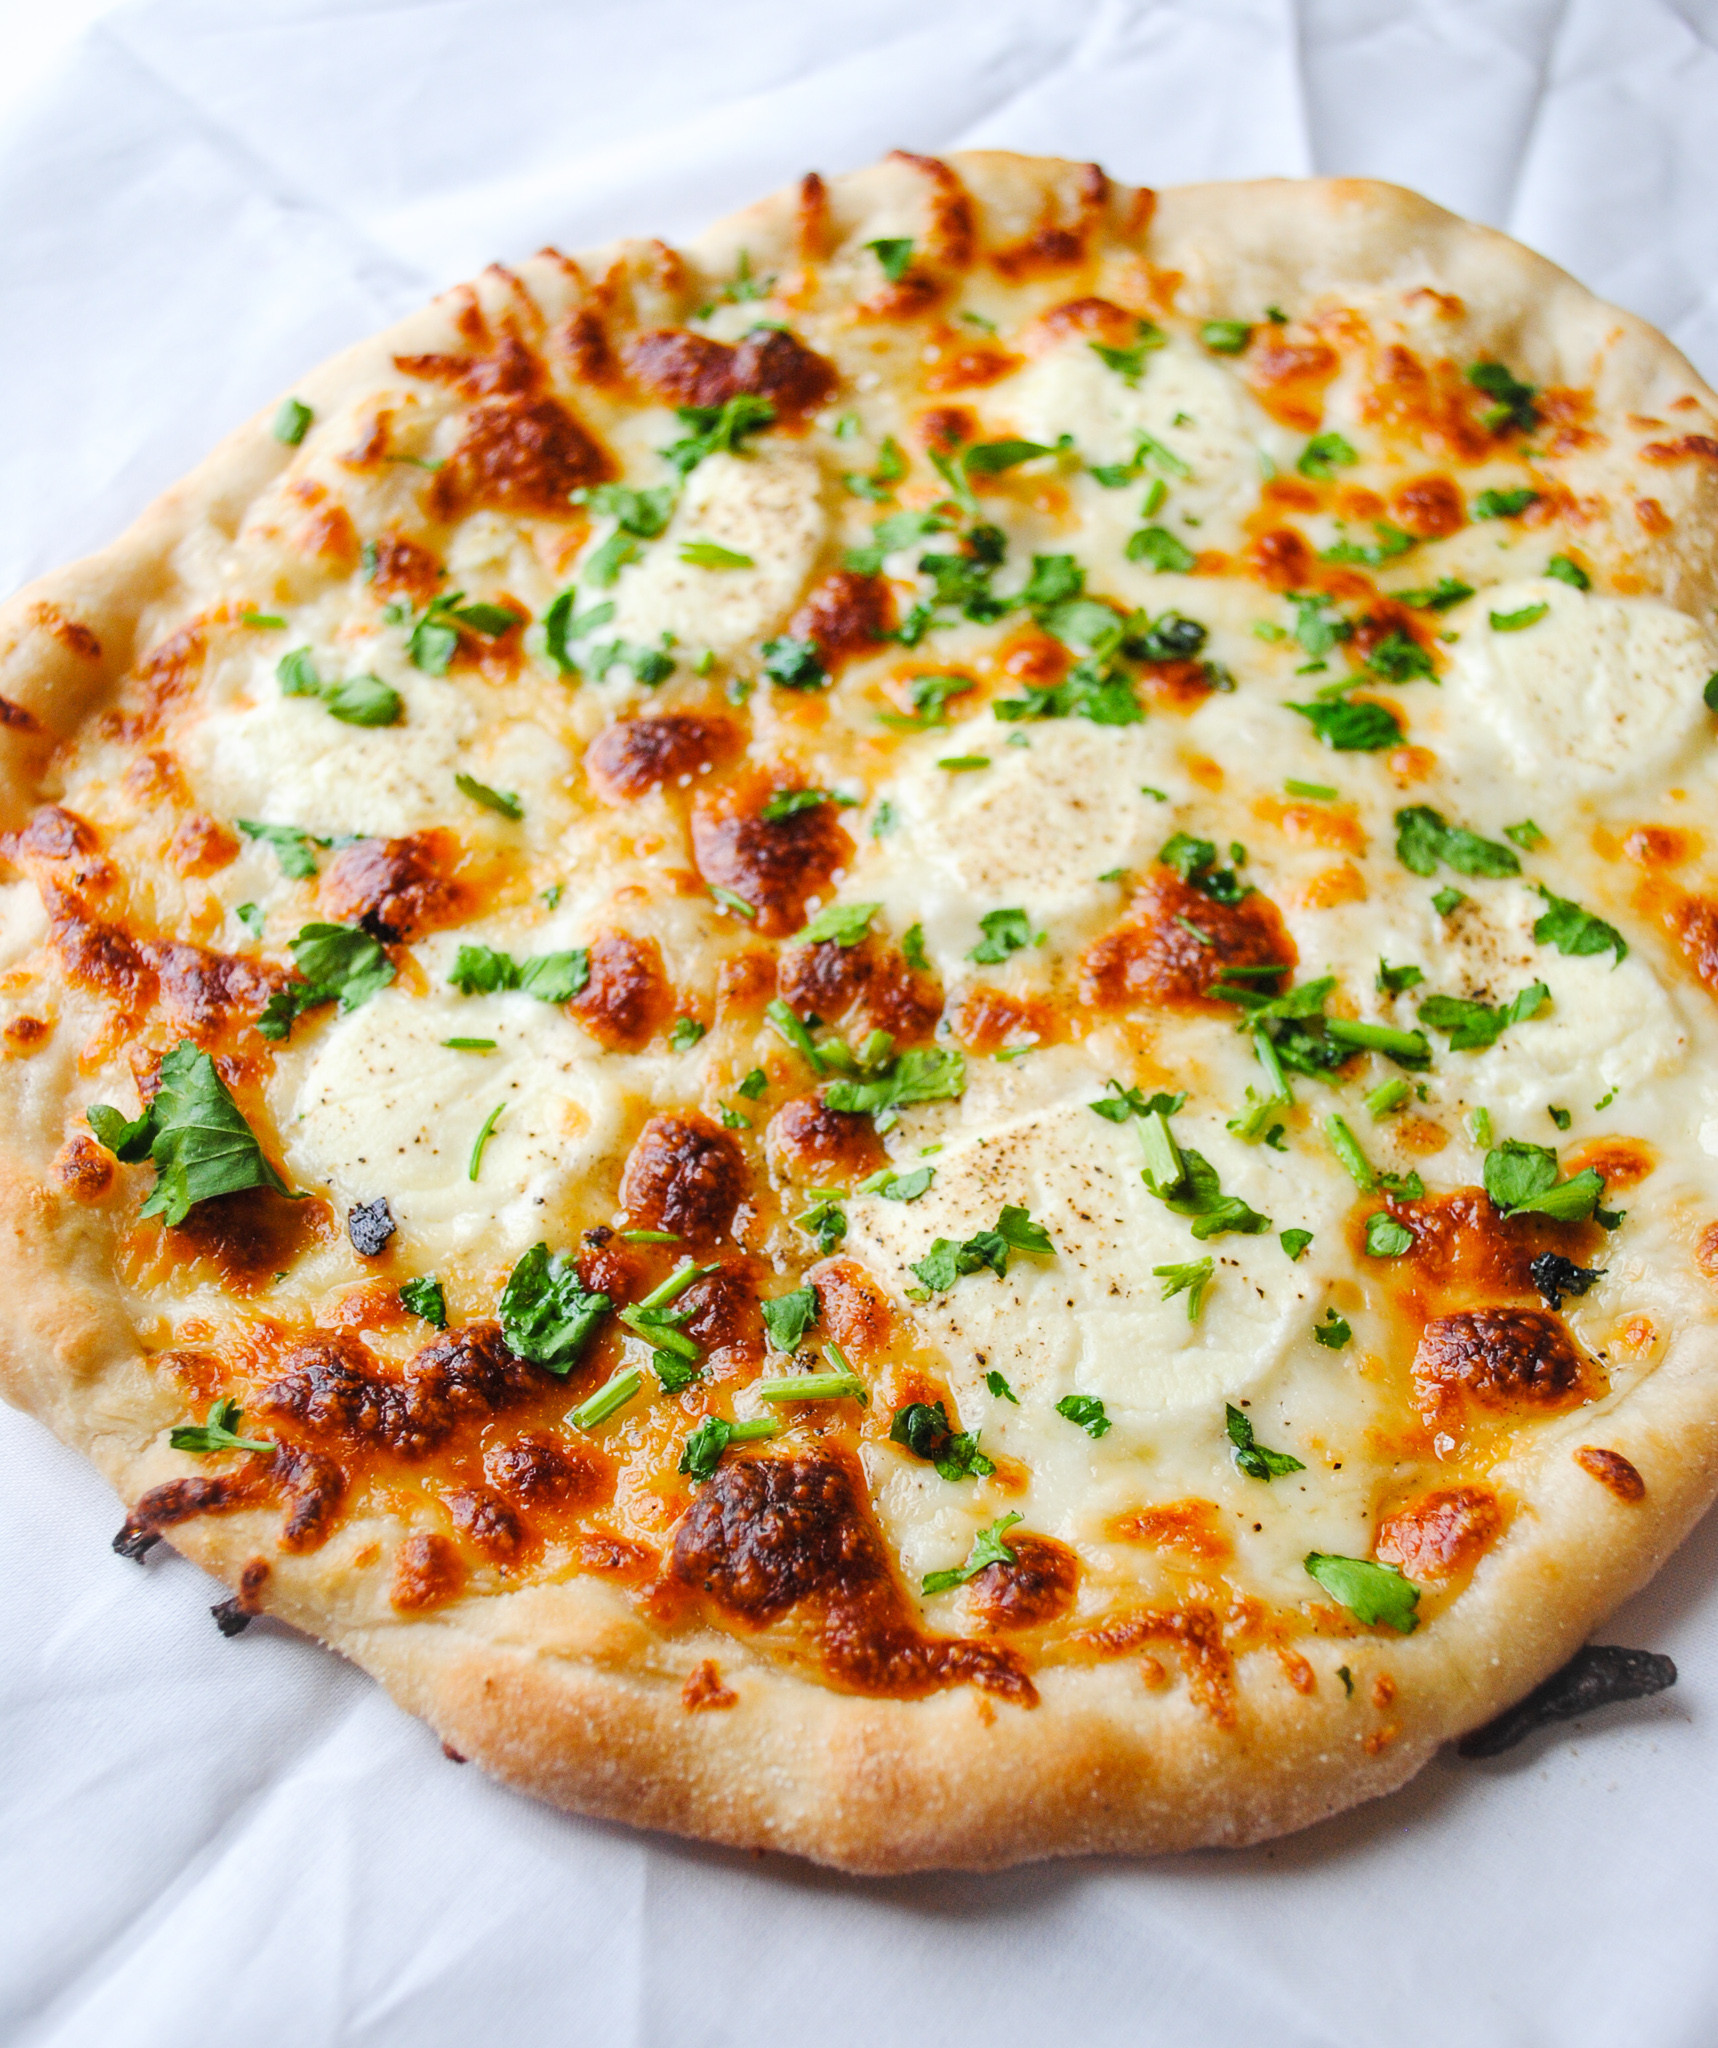 White Sauce for Pizza Recipe New White Sauce Pizza with Ricotta Cheese